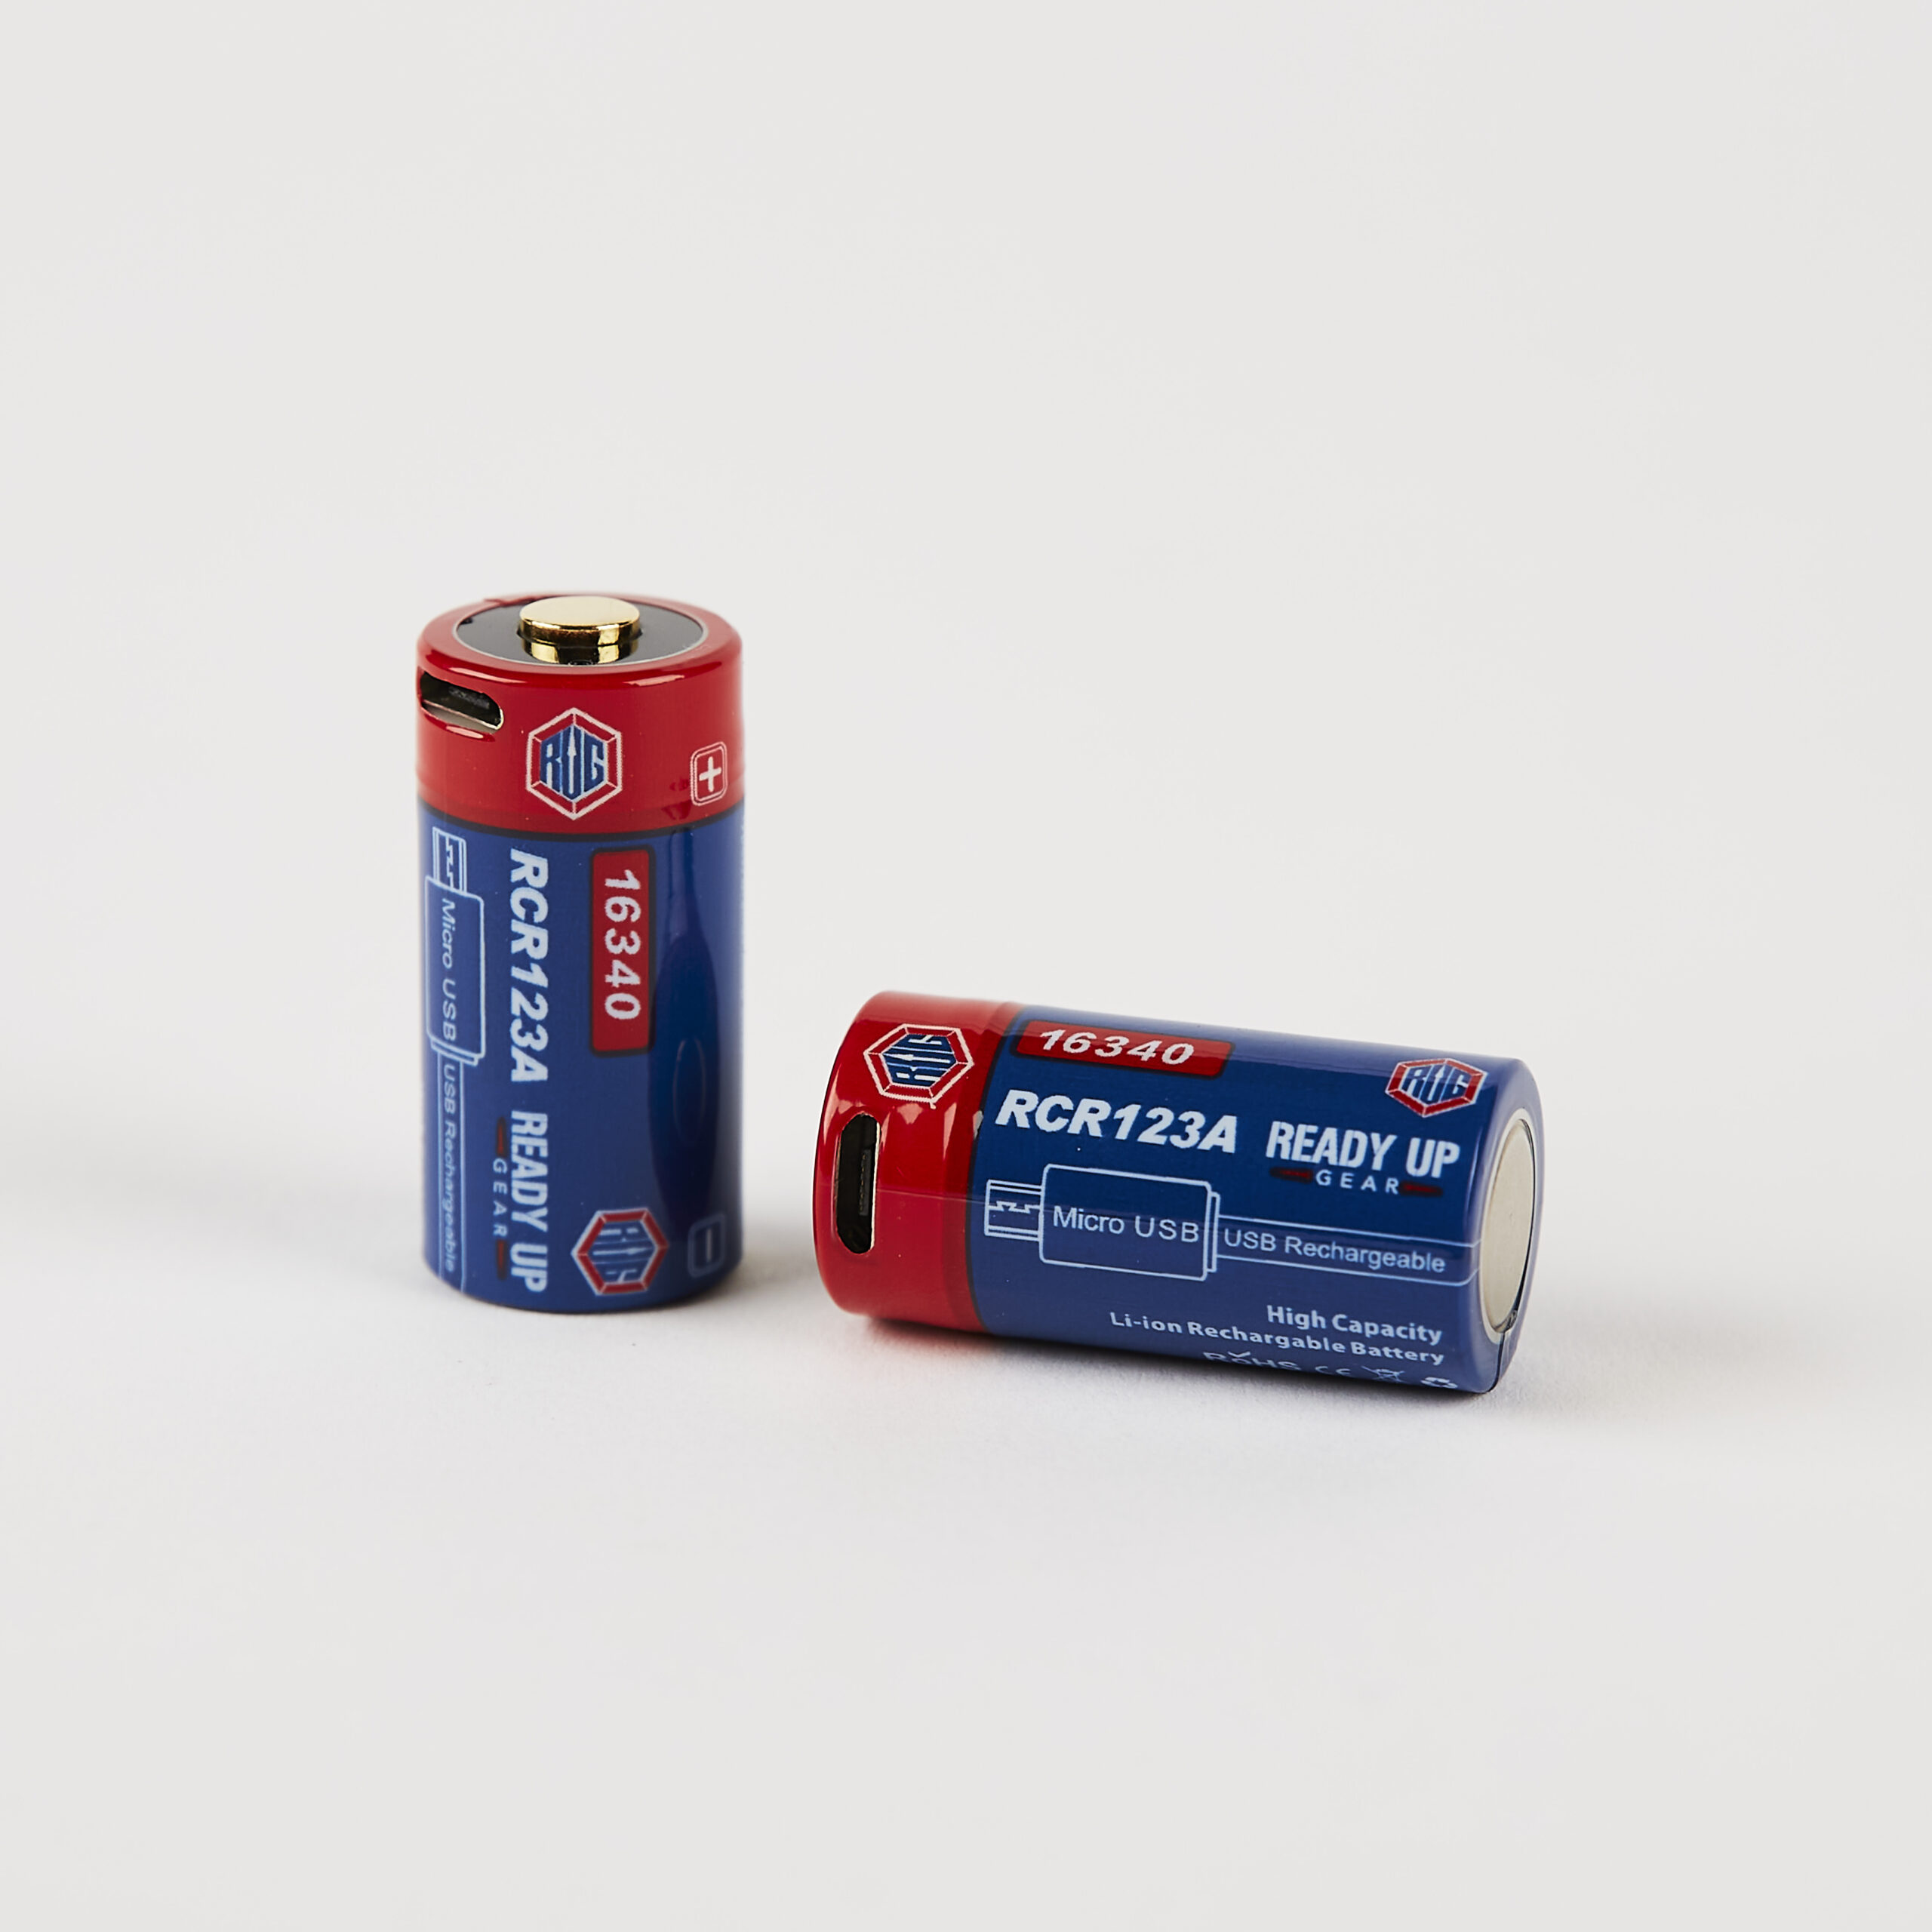 cr123a-rechargeable-products